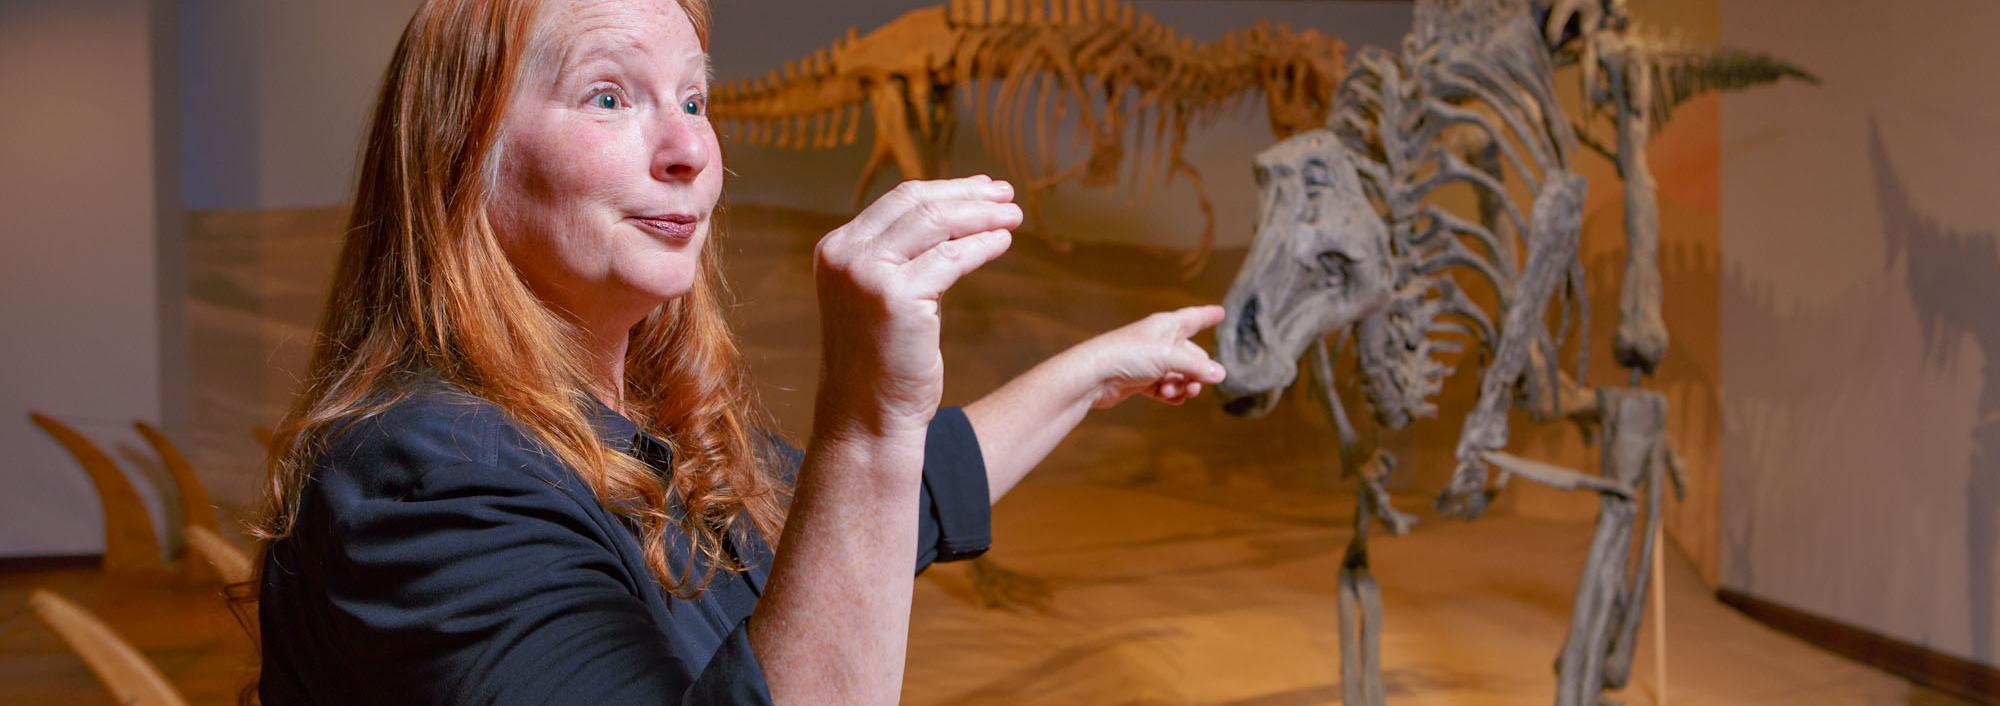 Woman stands in front of display of replica life-size dinosaur fossil skeletons with her arm and hand making a upside down L shape